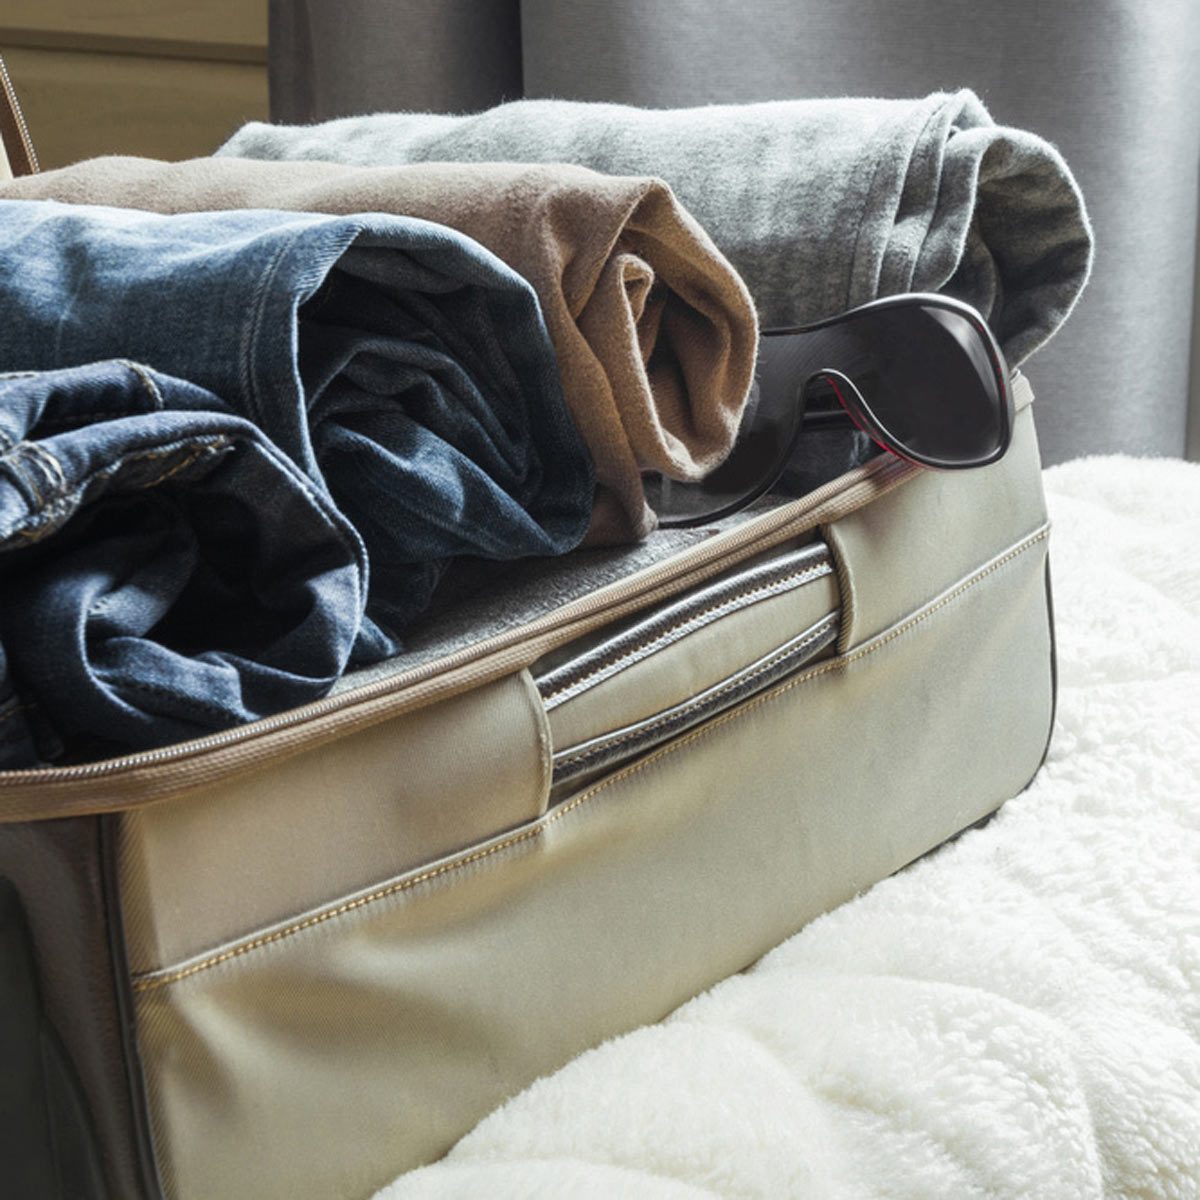 suitcase storage clothes rolled up